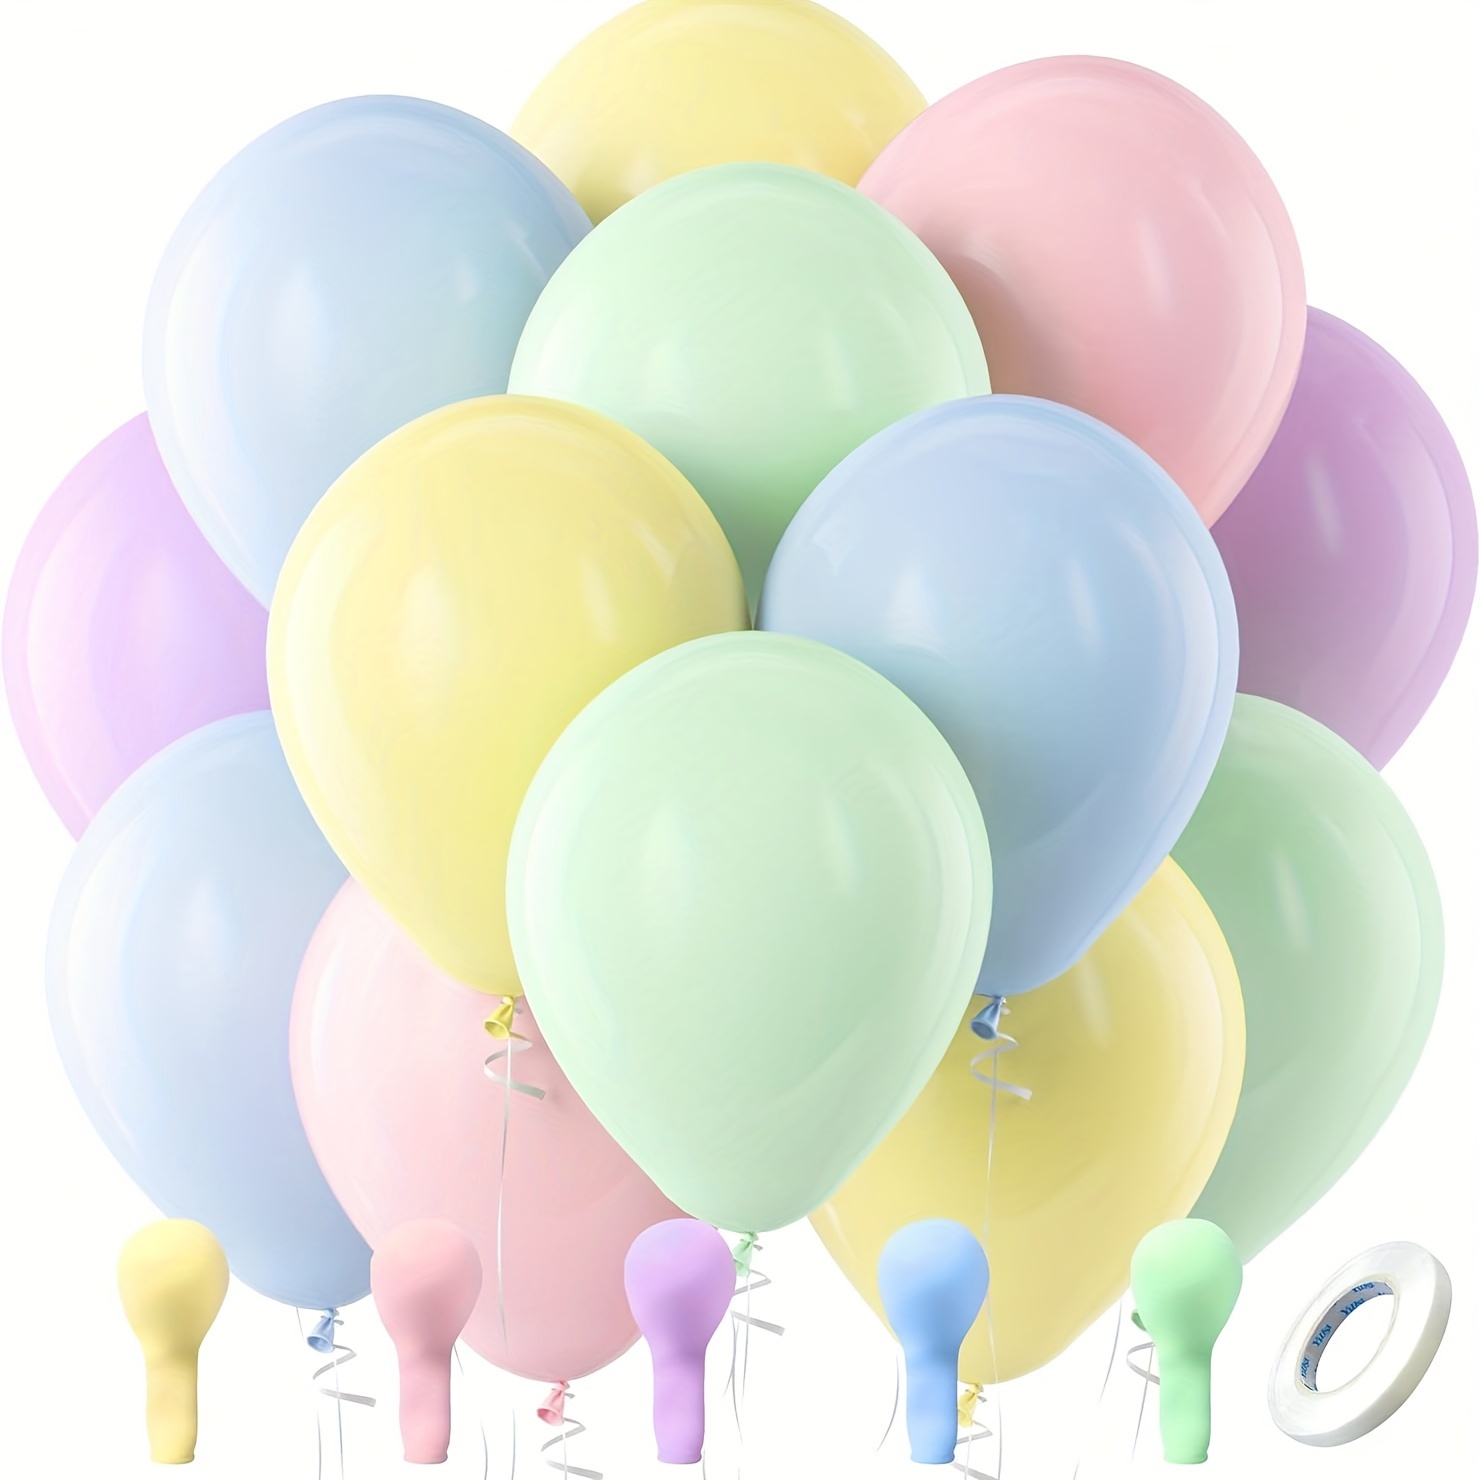 

101-piece Pastel Latex Balloon Set - 10" Round Multicolor Macaron Helium Balloons With Curling Ribbon For Birthday, Baby Shower & Wedding Decorations Birthday Balloons Balloons Decoration Set